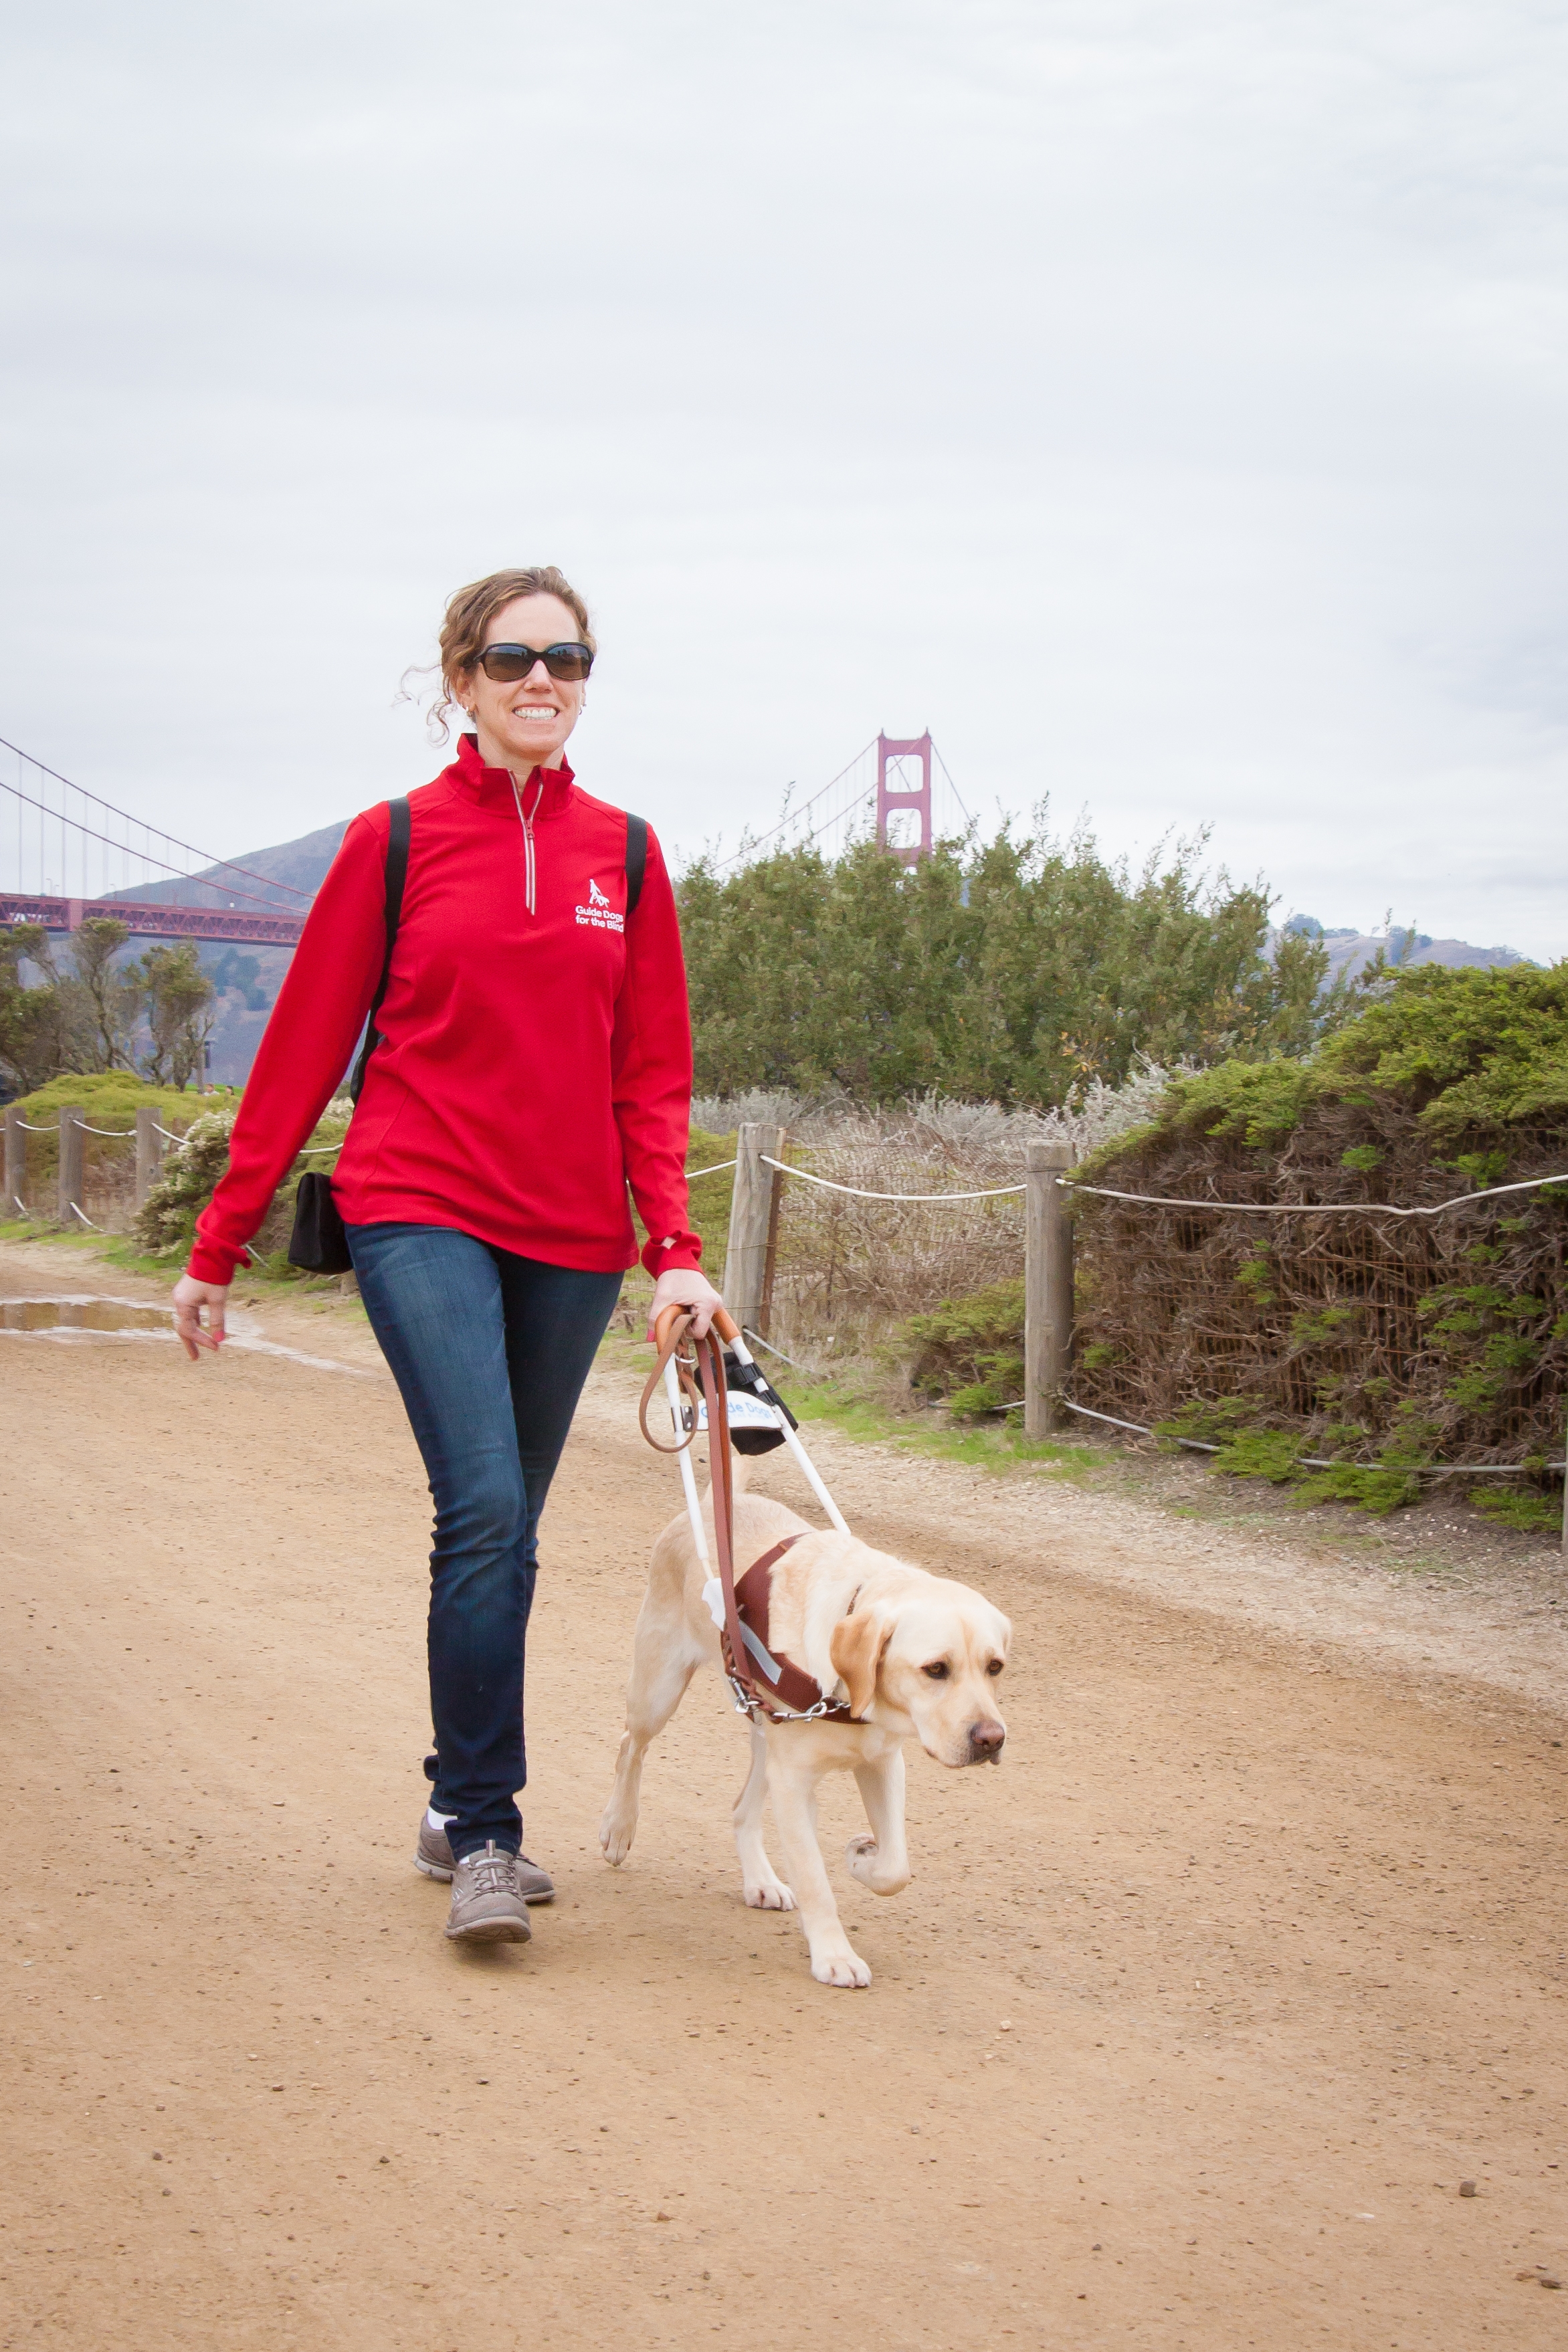 In this photo, Jane walks with her yellow Lab guide dog, Pilaf, along a coastal trail with the Golden Gate Bridge in the background. Jane smiles while looking forward and Pilaf looks focused on their destination.